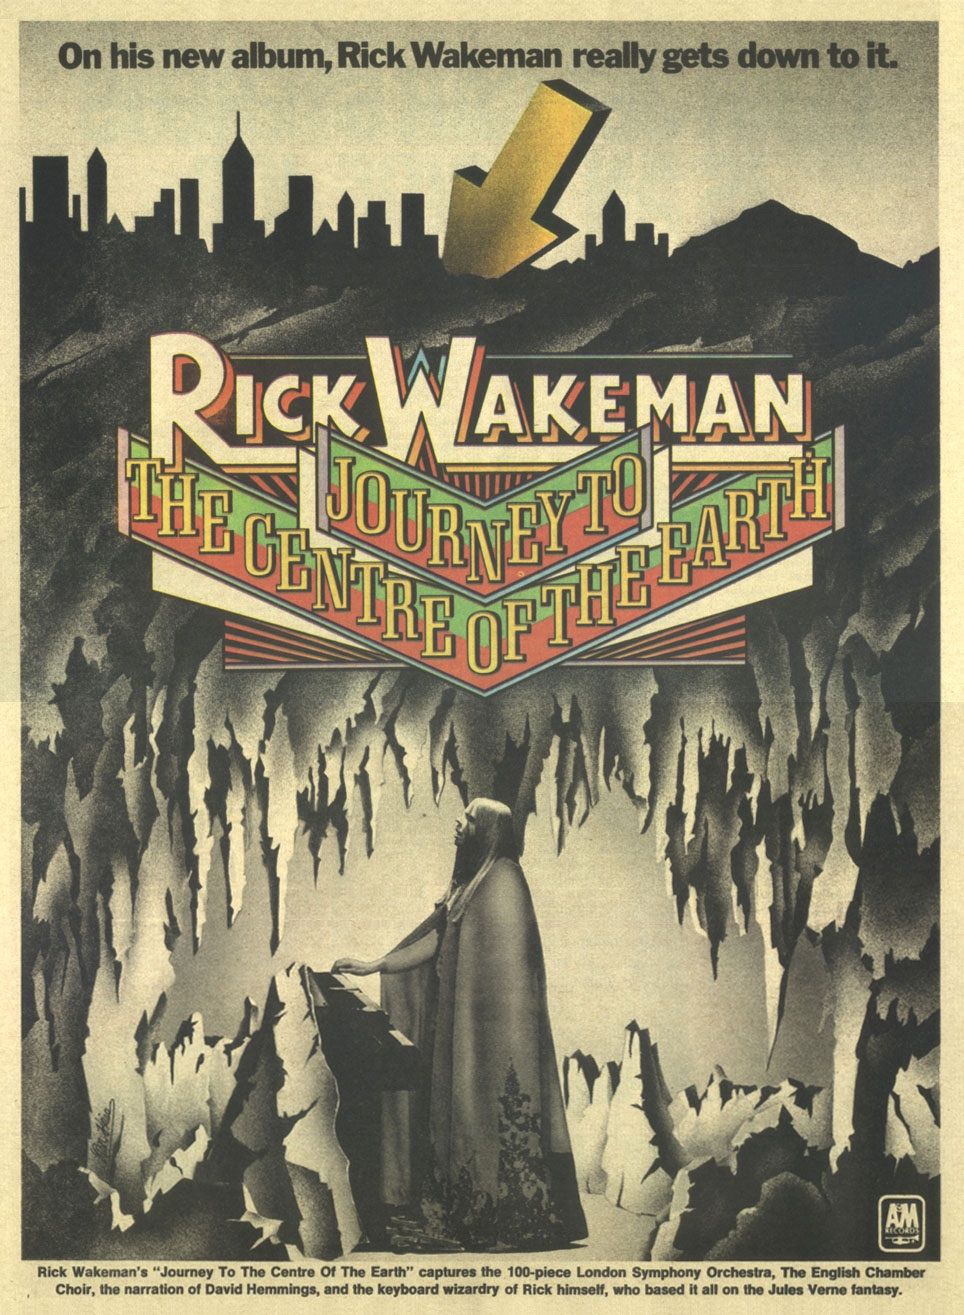 F'N bored during quarantine ?? Pop some LSD and listen to Rick Wakeman.